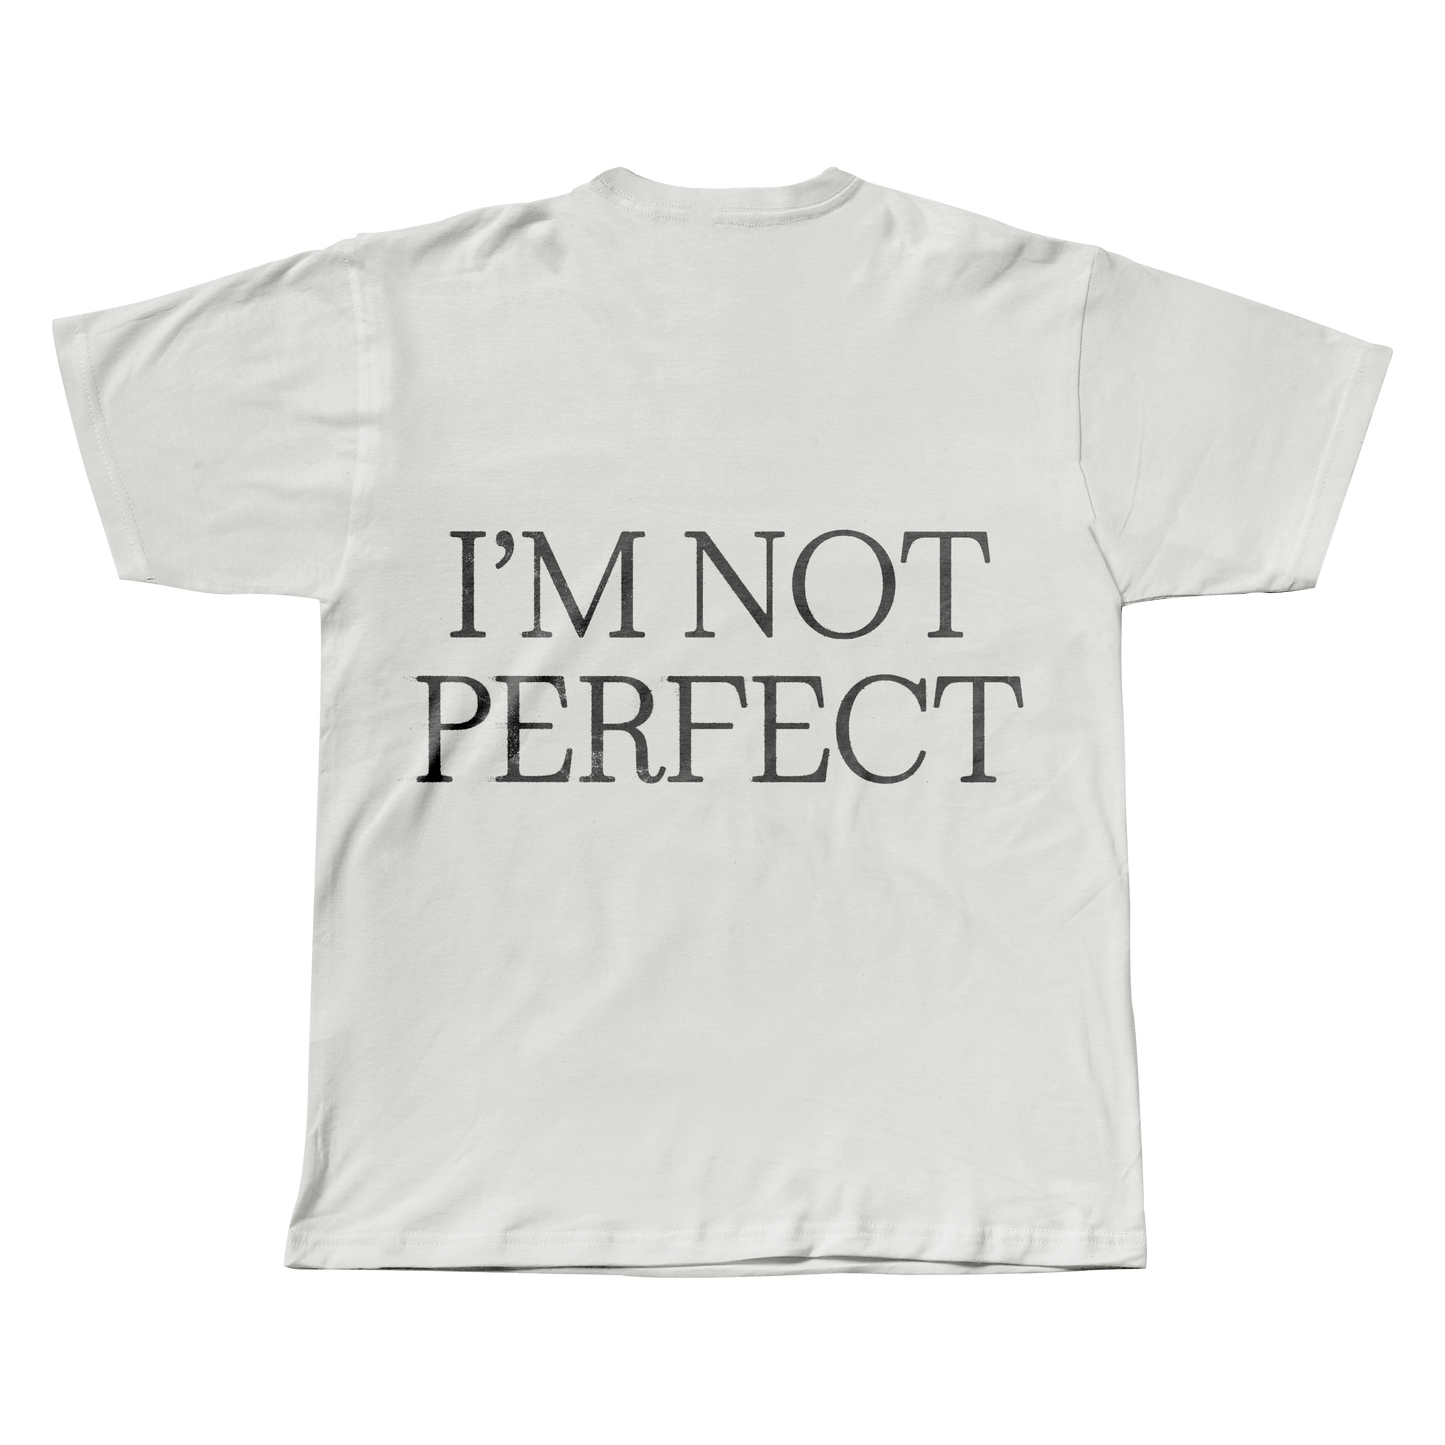 I'm Not Perfect Tee